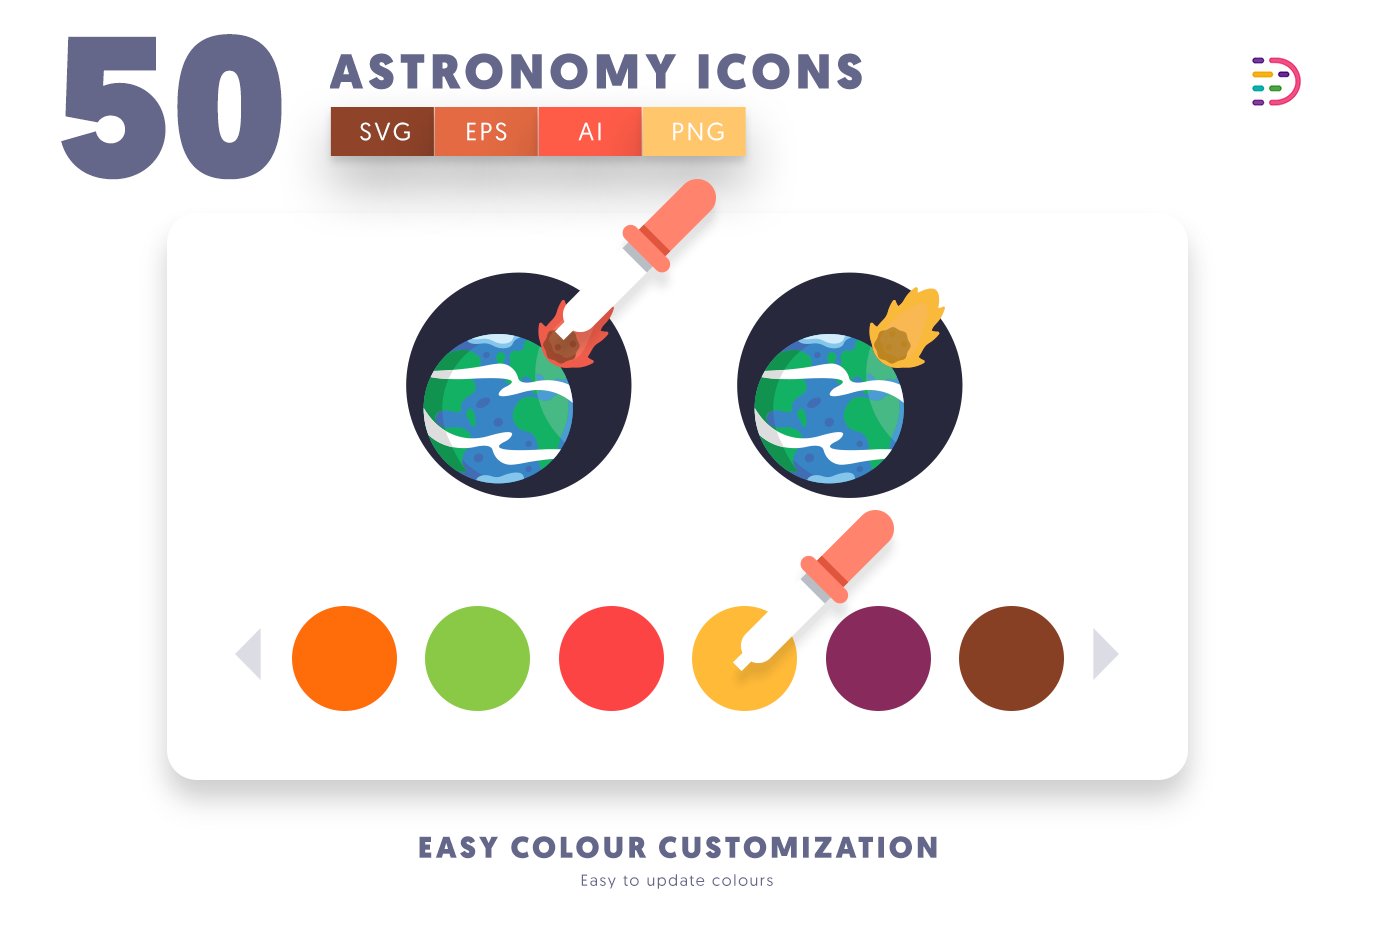 astronomy icons cover 7 268